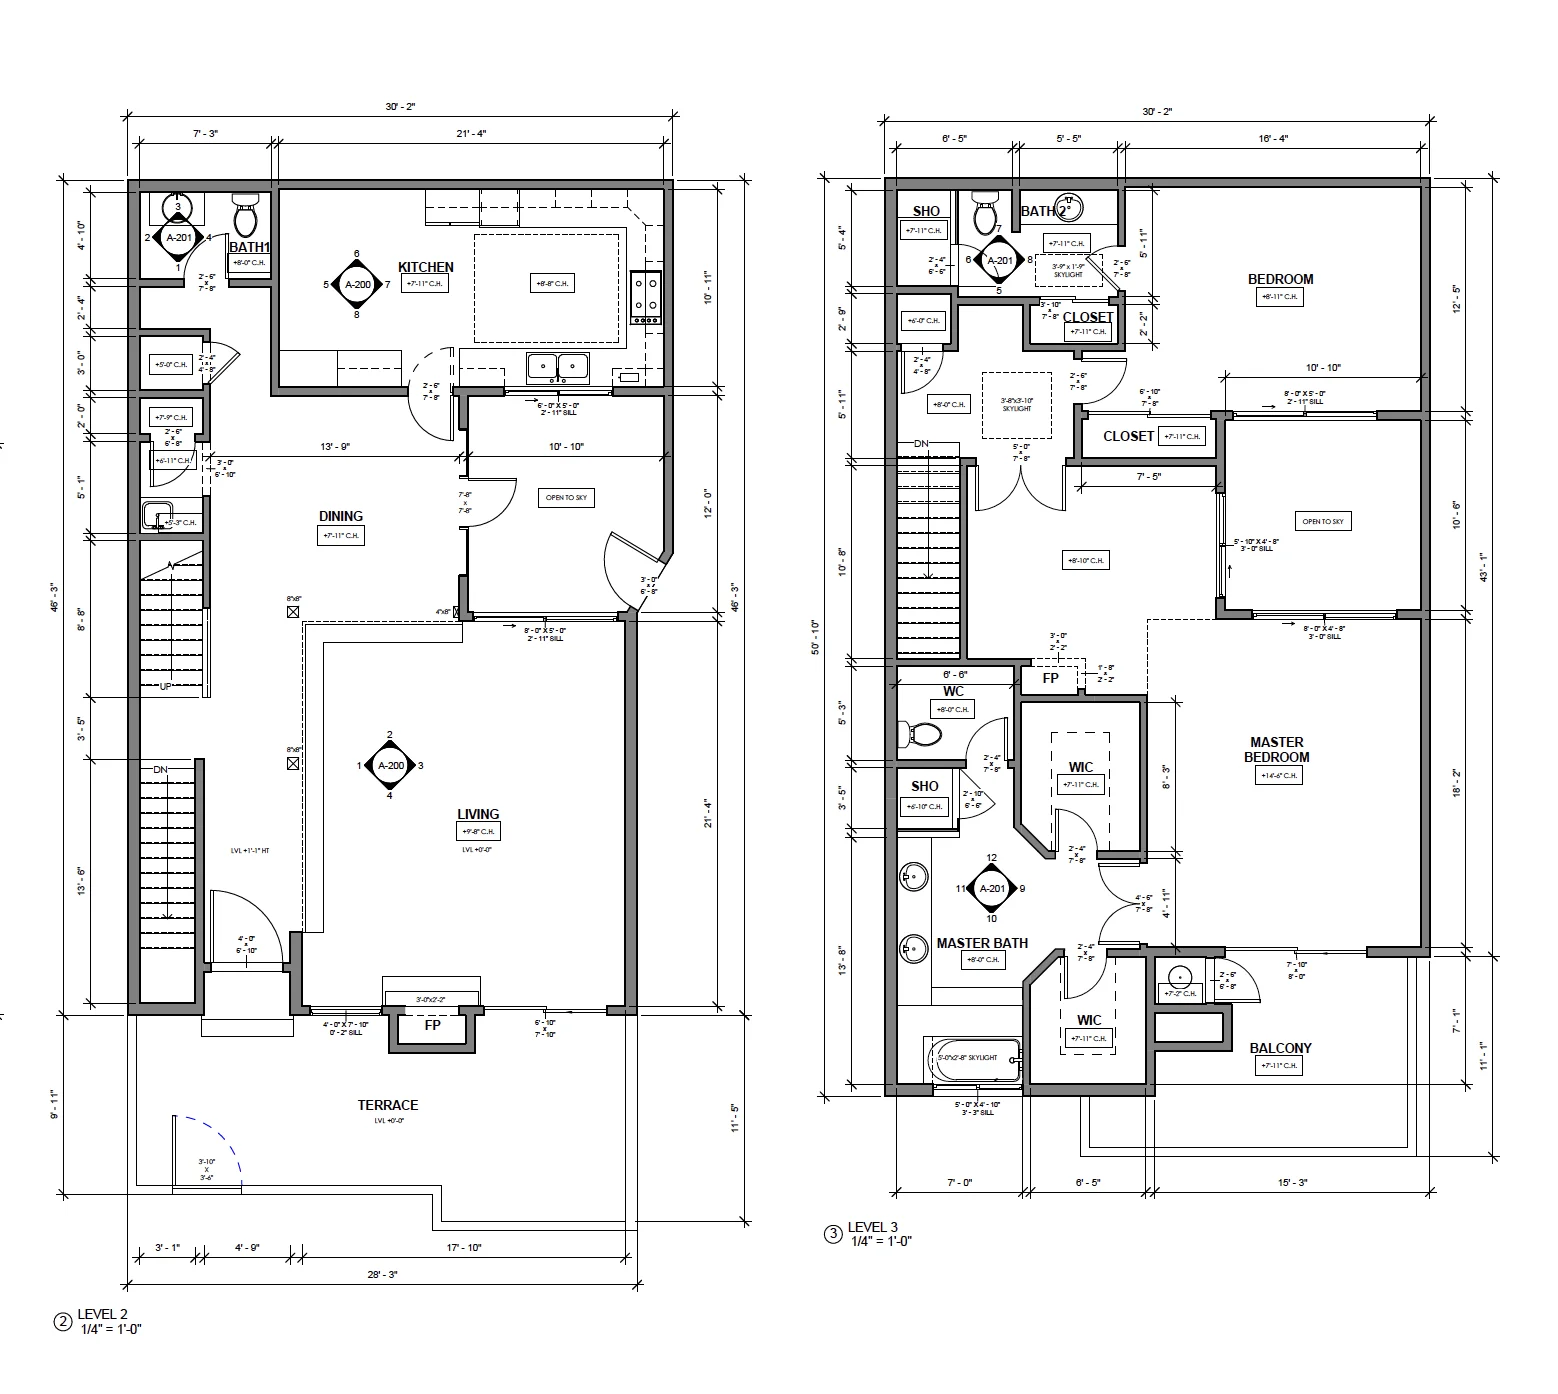 As Built Floor Plan Layout of a residential building showing 2 different levels 